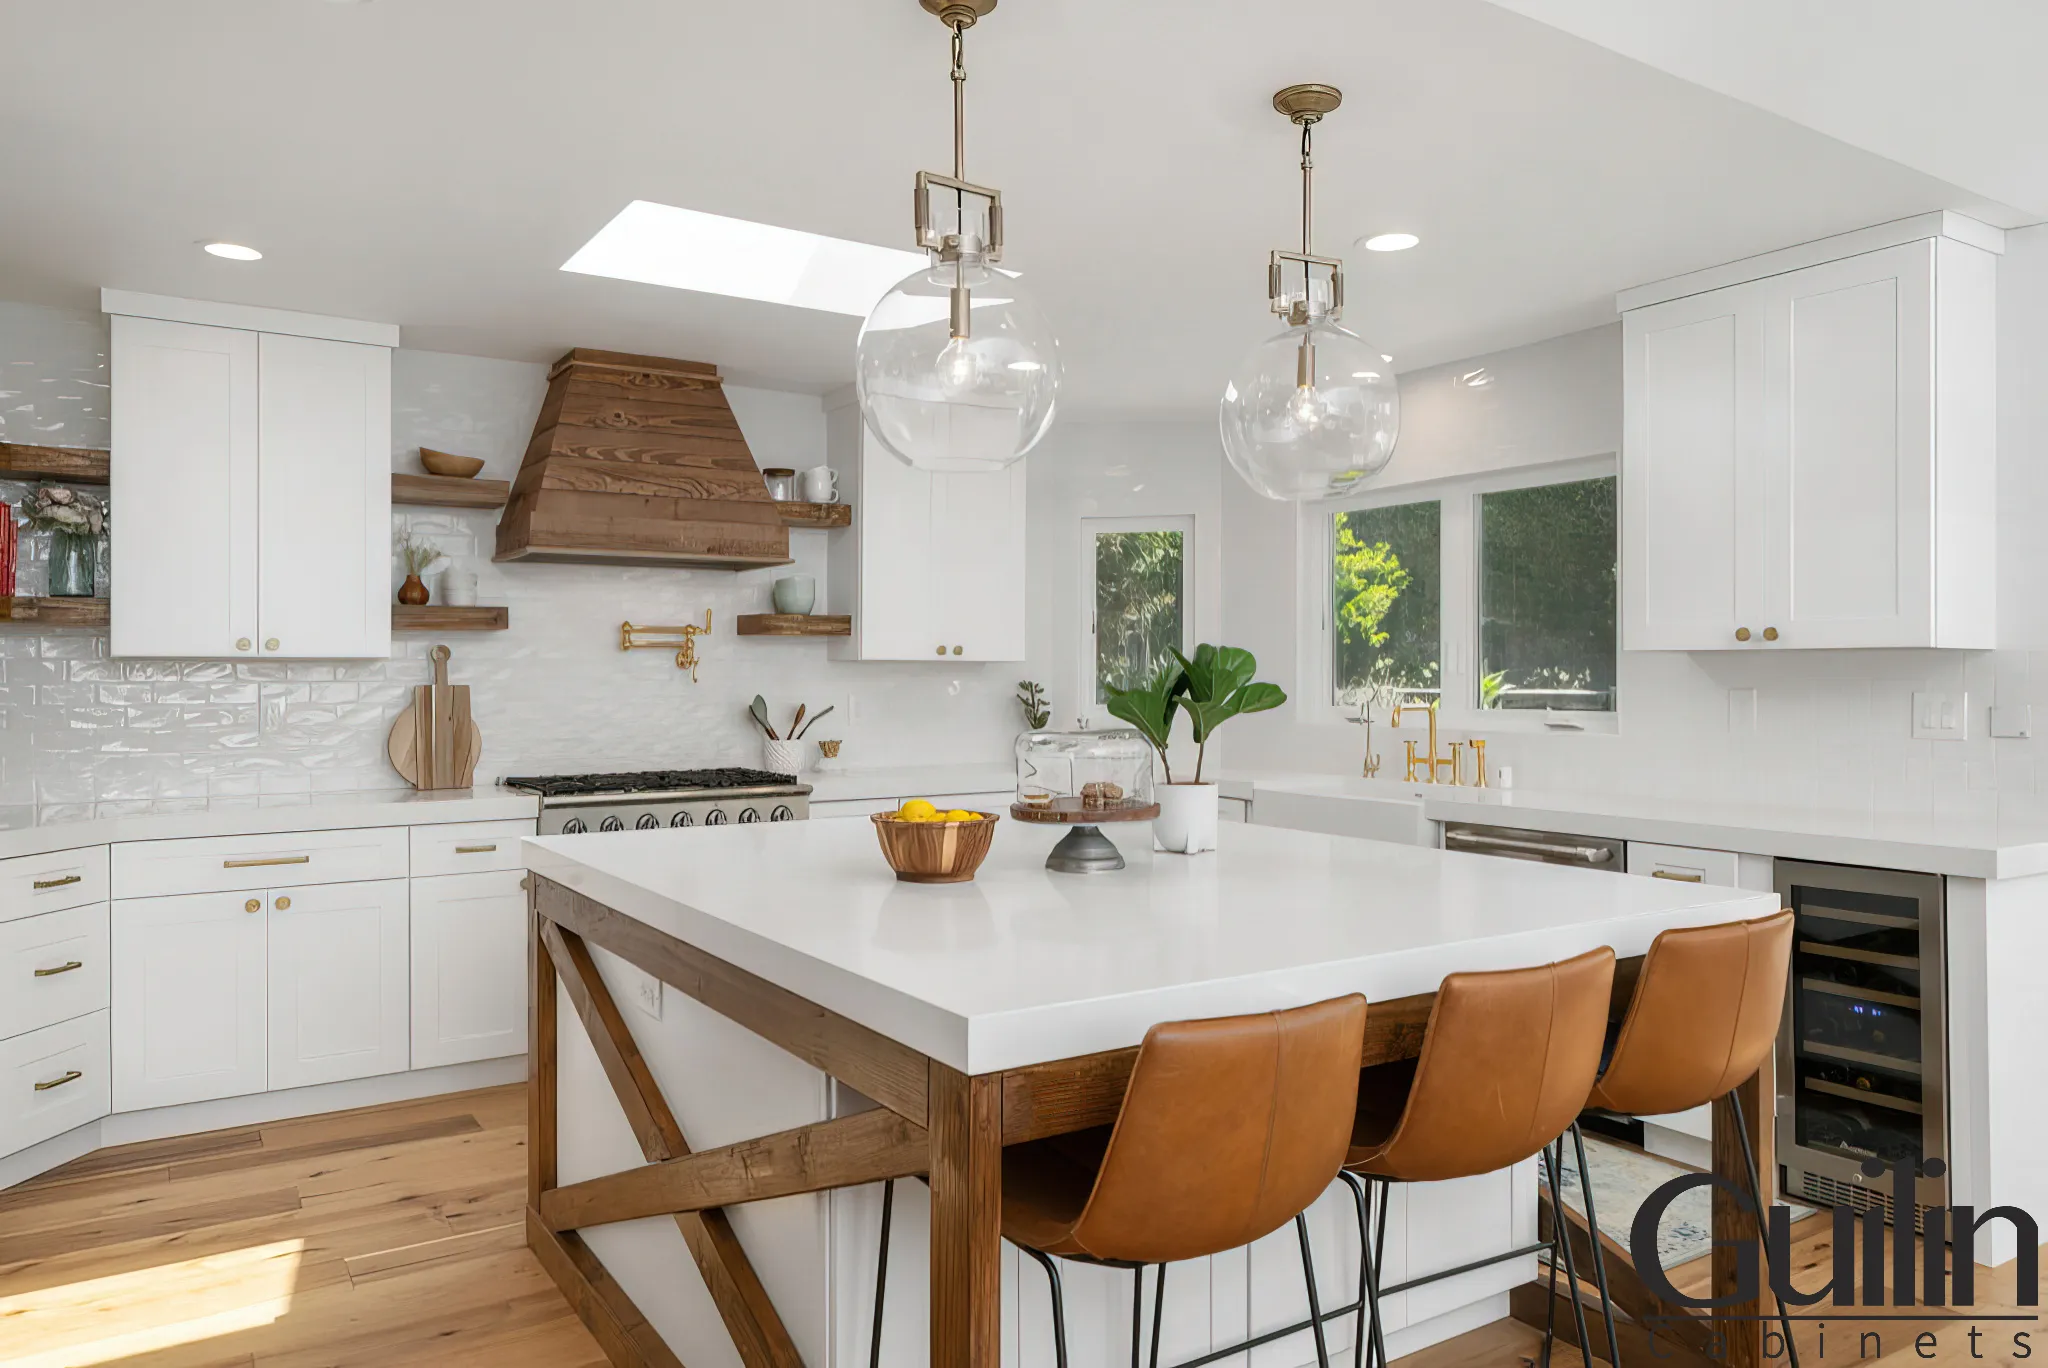 The Farm house kitchen style with white cabinets by Guilin Cabinets Contrator